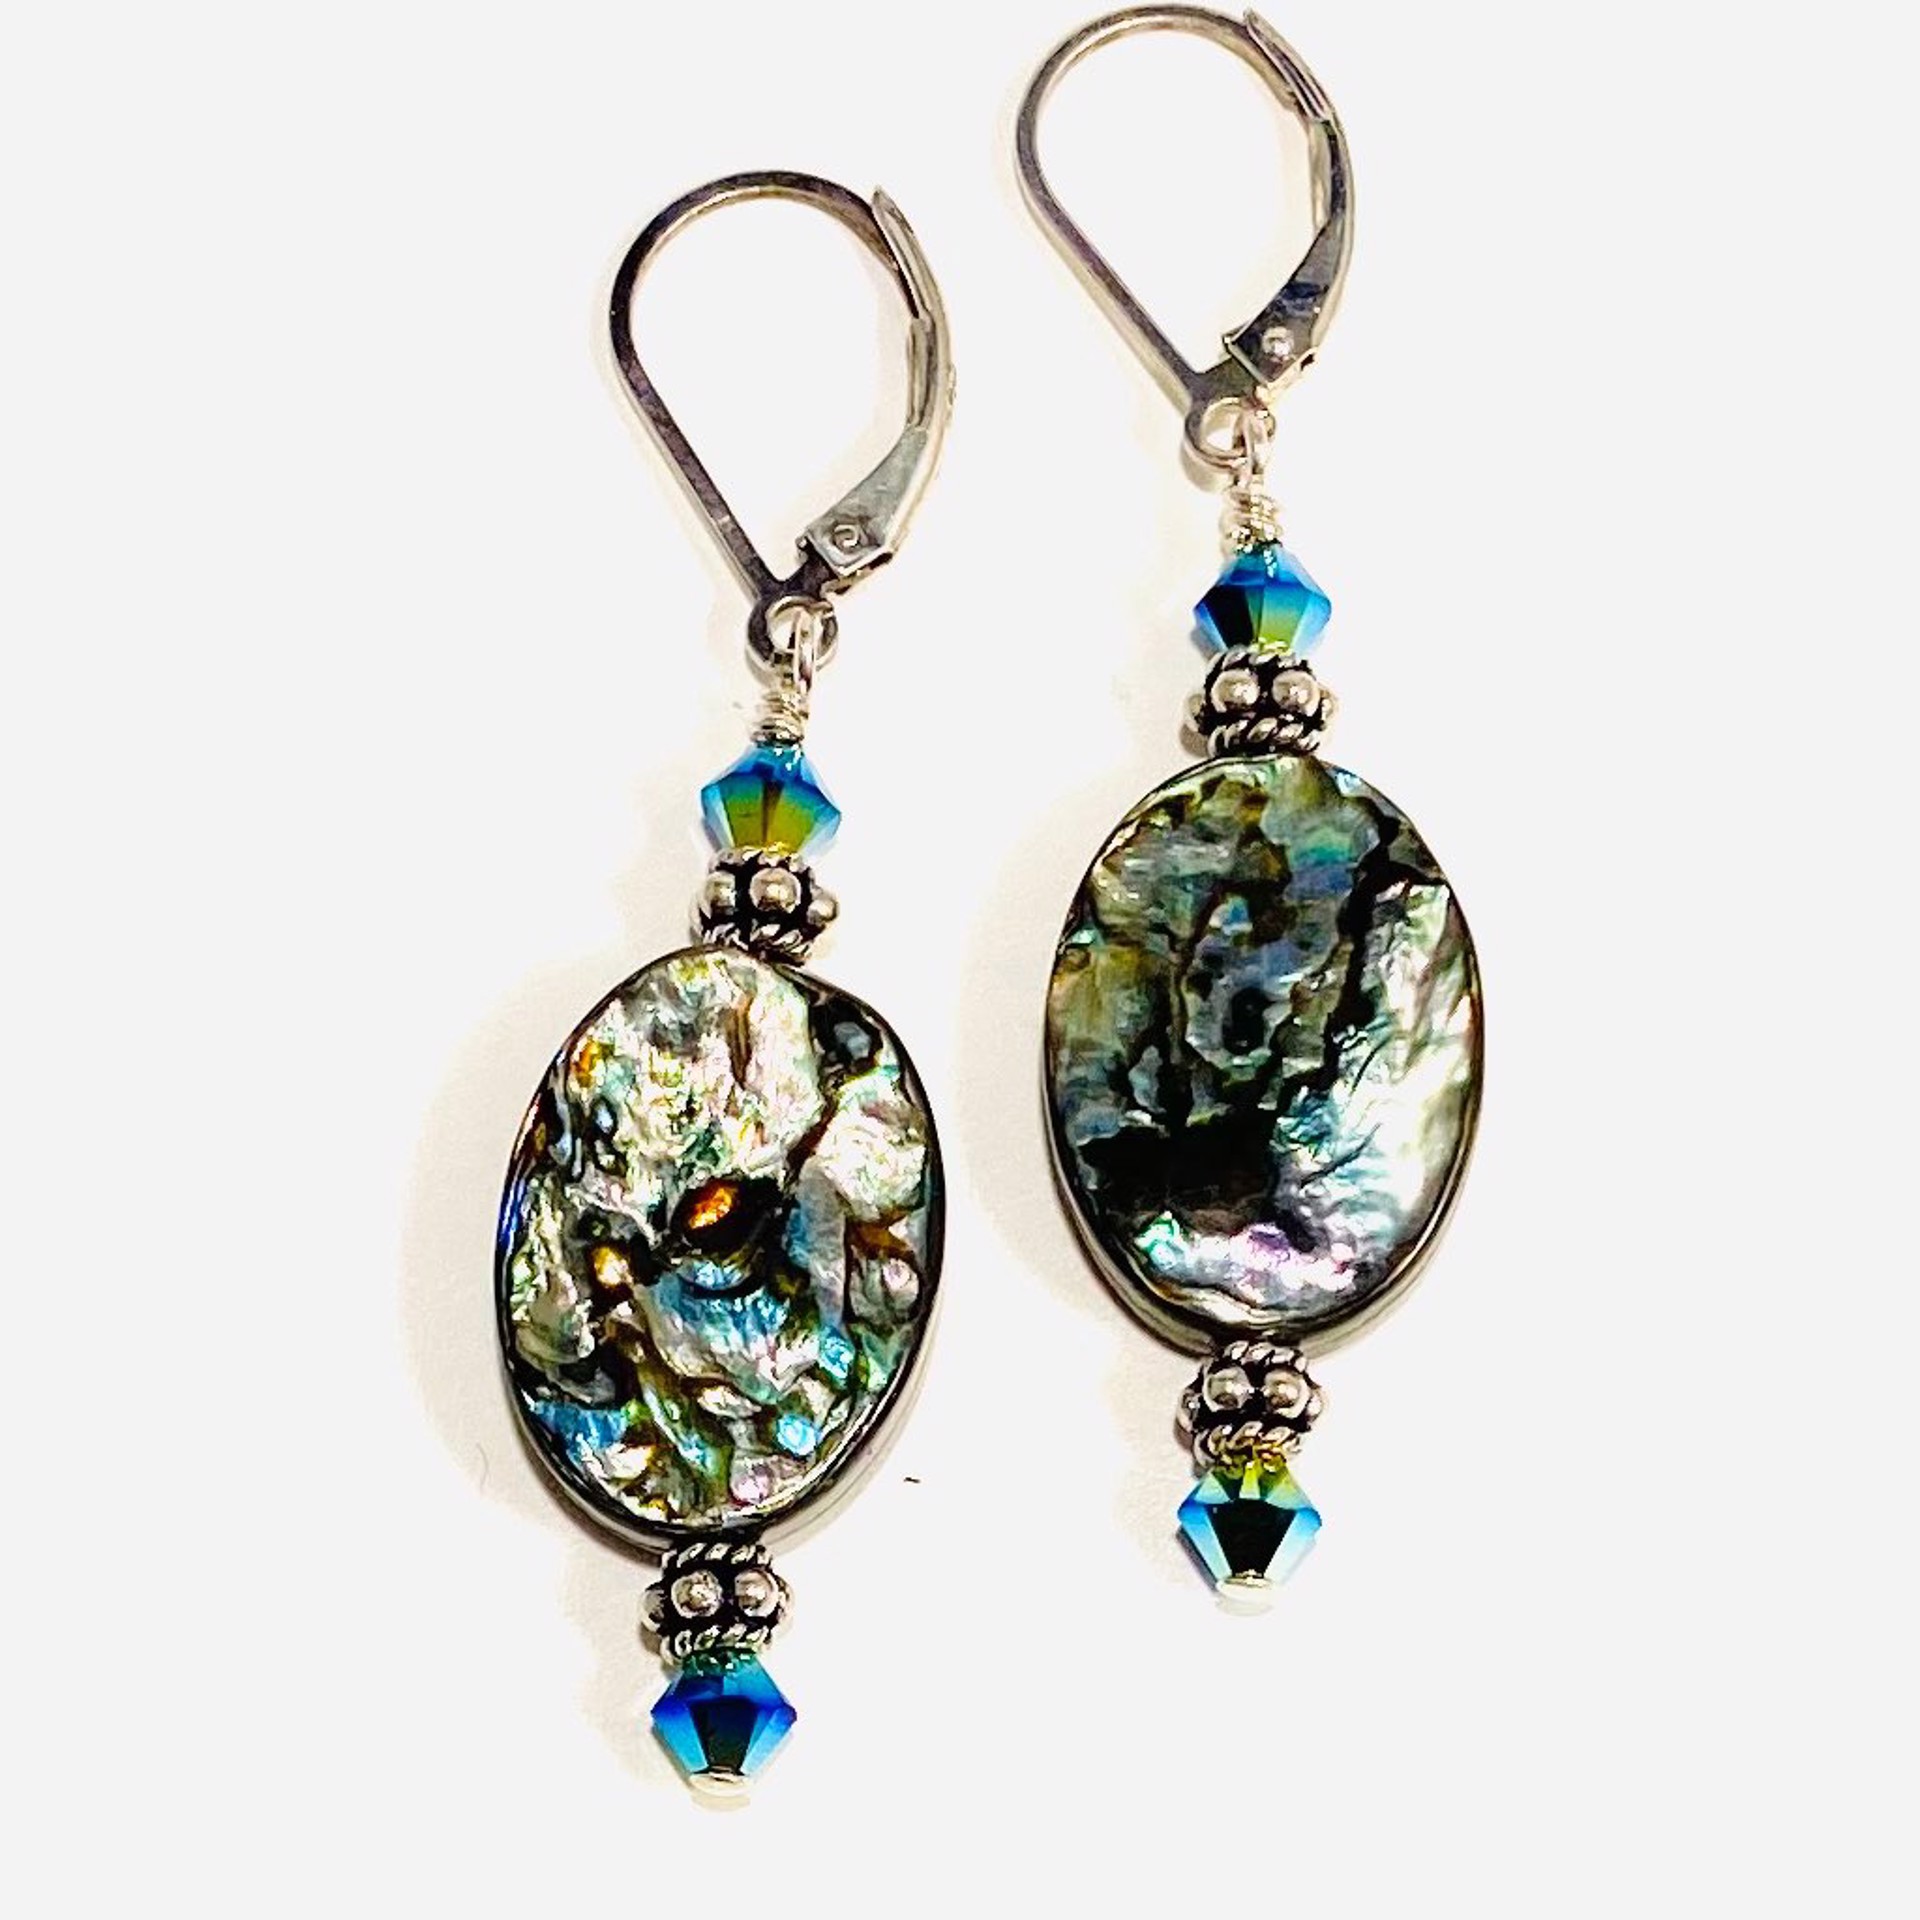 SHOSH22-42 Oval Abalone and Crystal Earrings by Shoshannah Weinisch